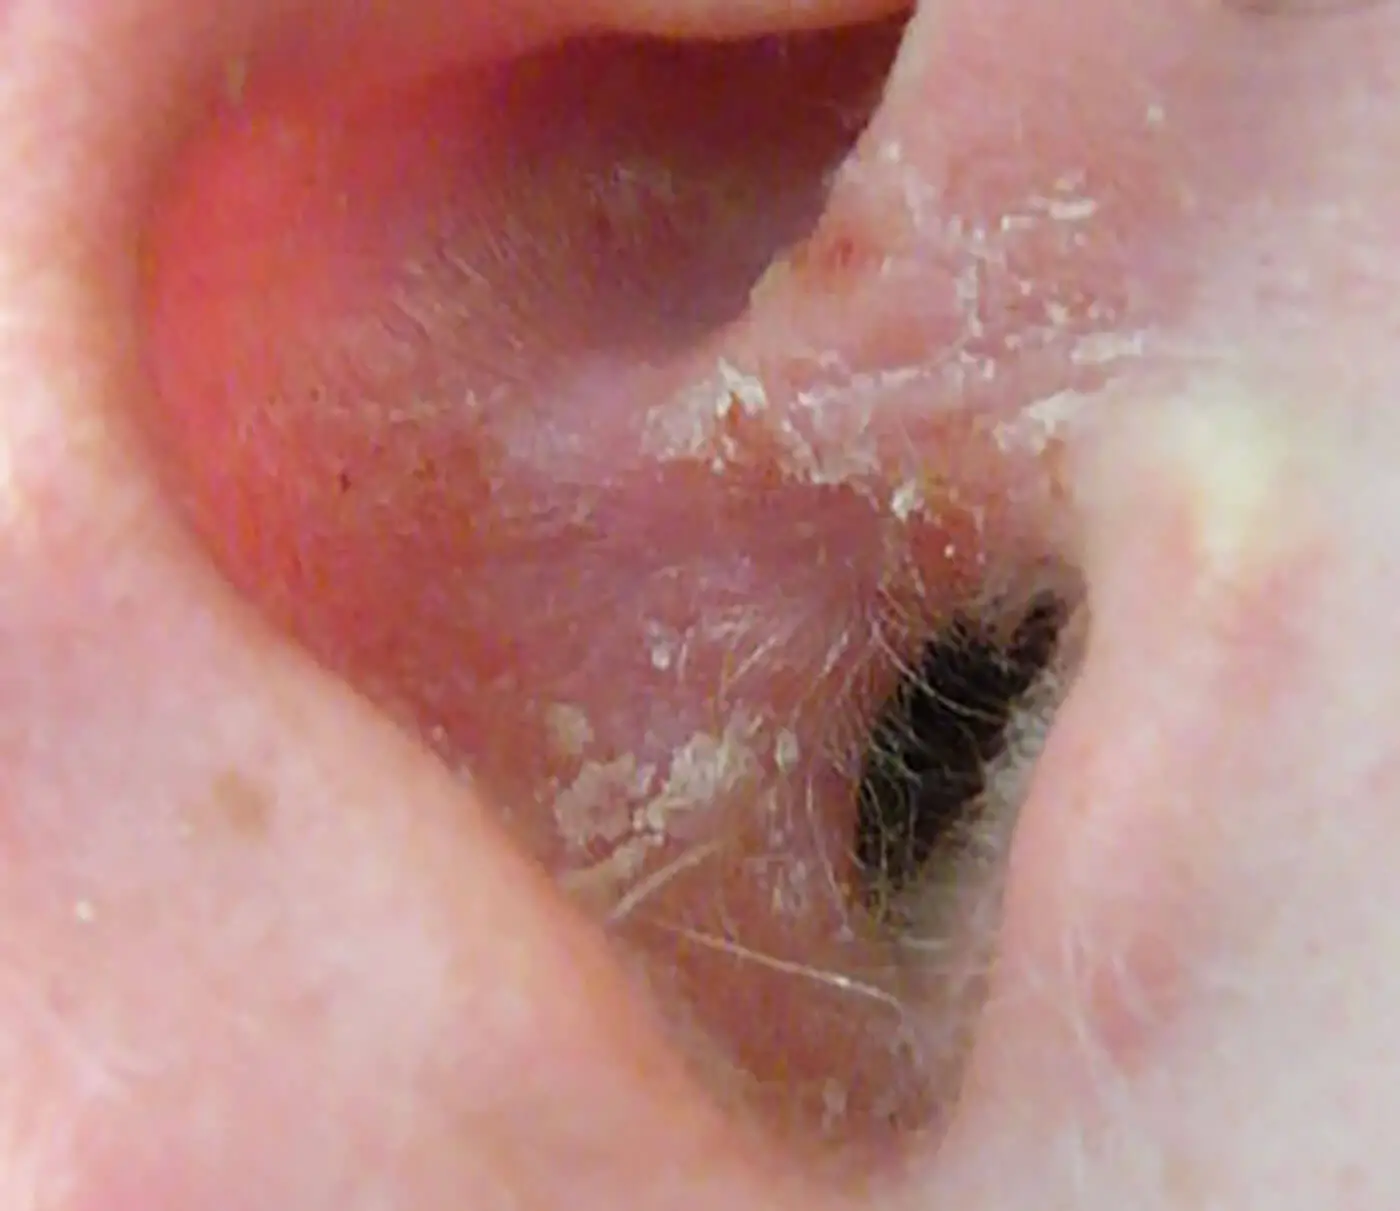 Psoriasis On The Ear